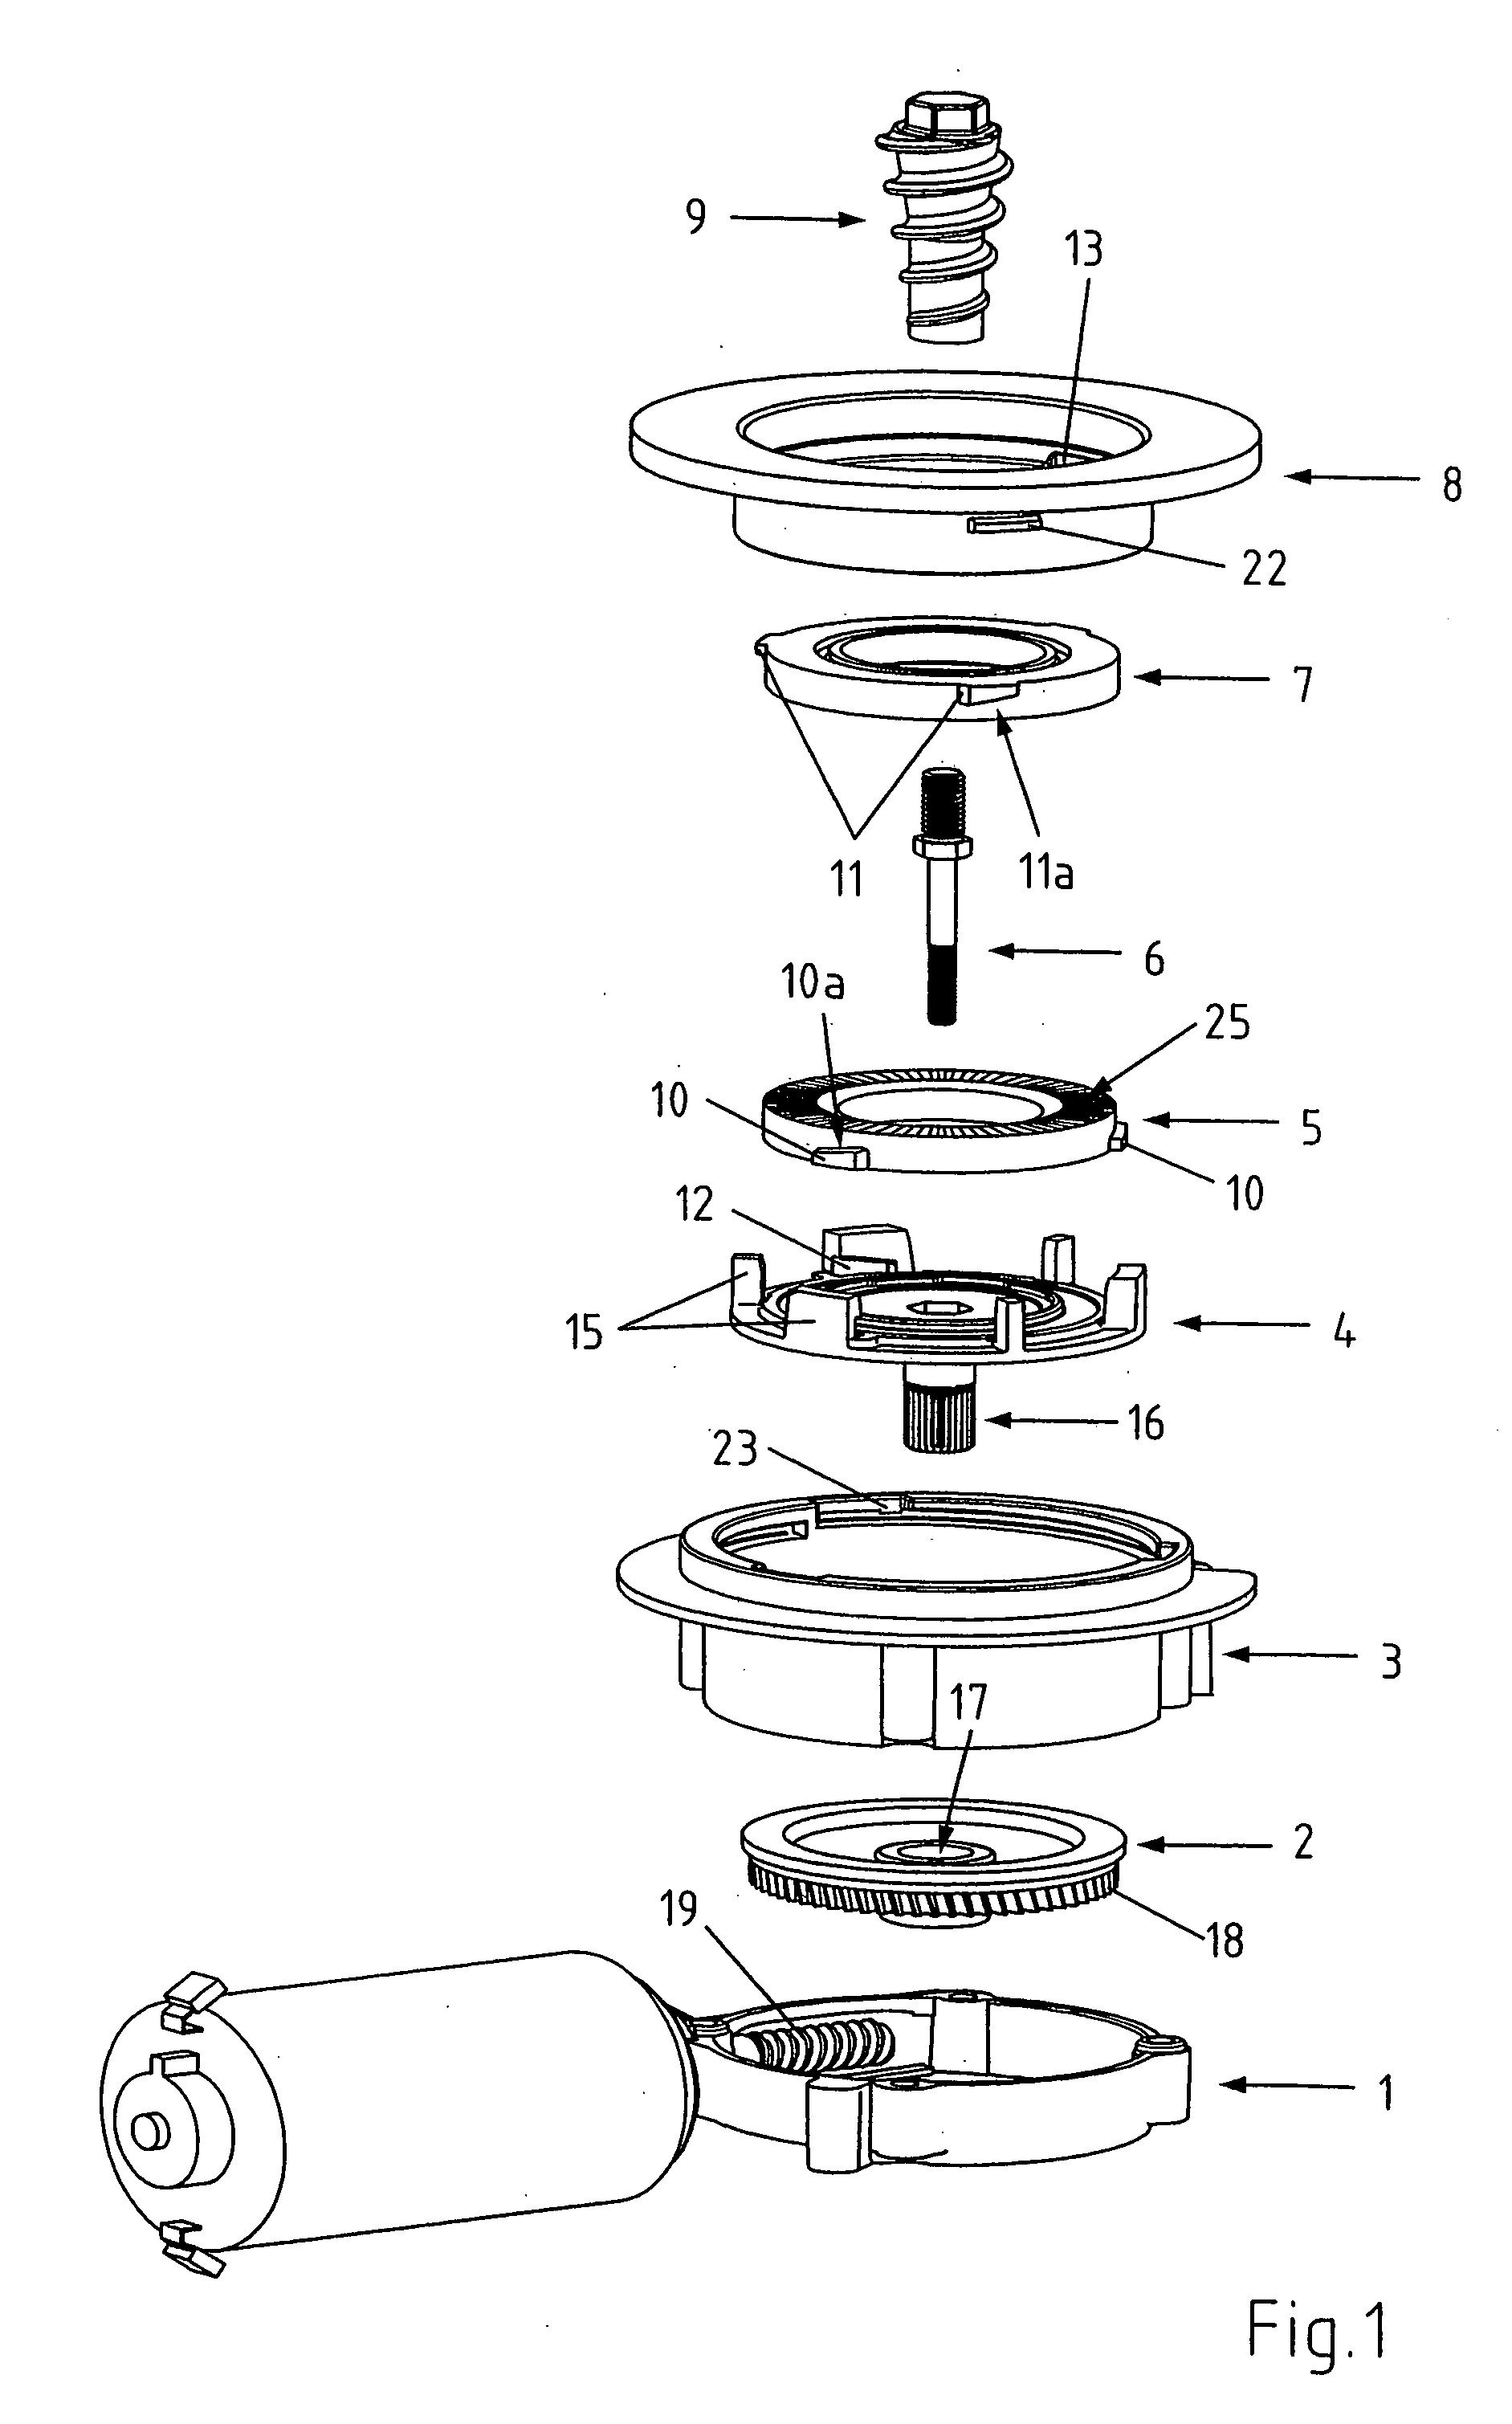 Coffee grinder assembly for a coffee machine